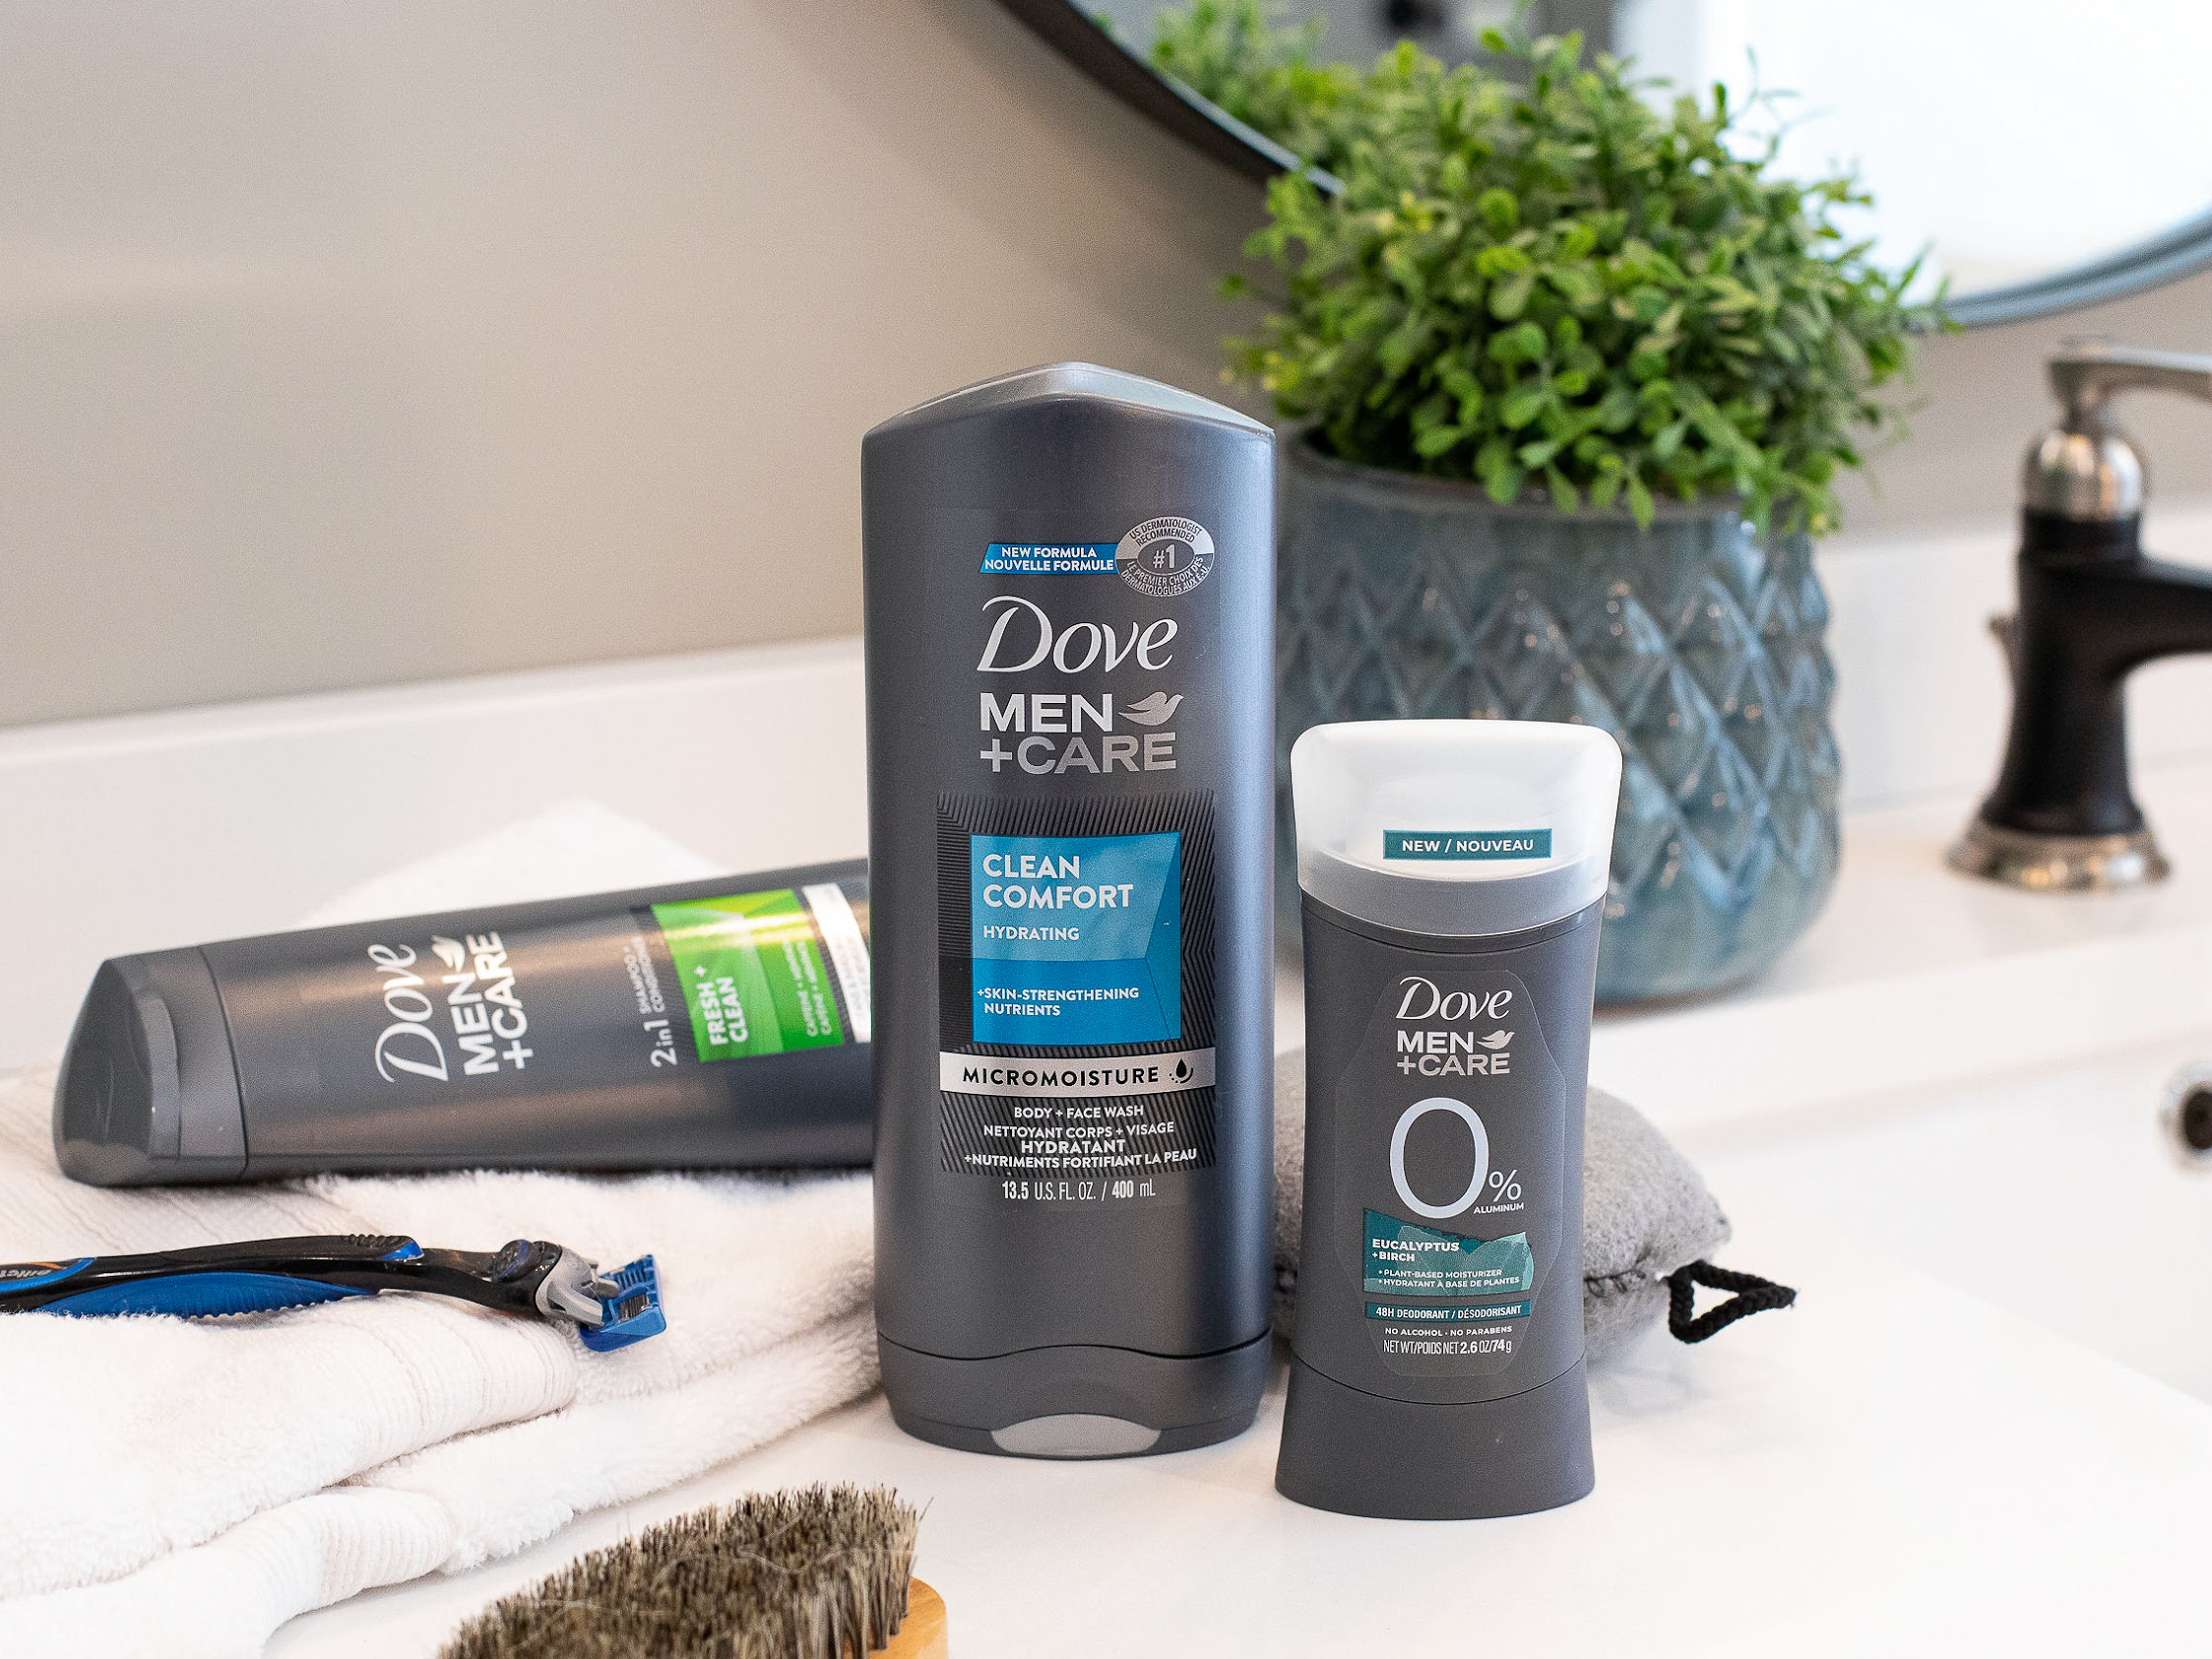 Score Big Savings On Dove Men+Care Products For The Guys At Publix - Feel Fresh For Game Day! on I Heart Publix 2